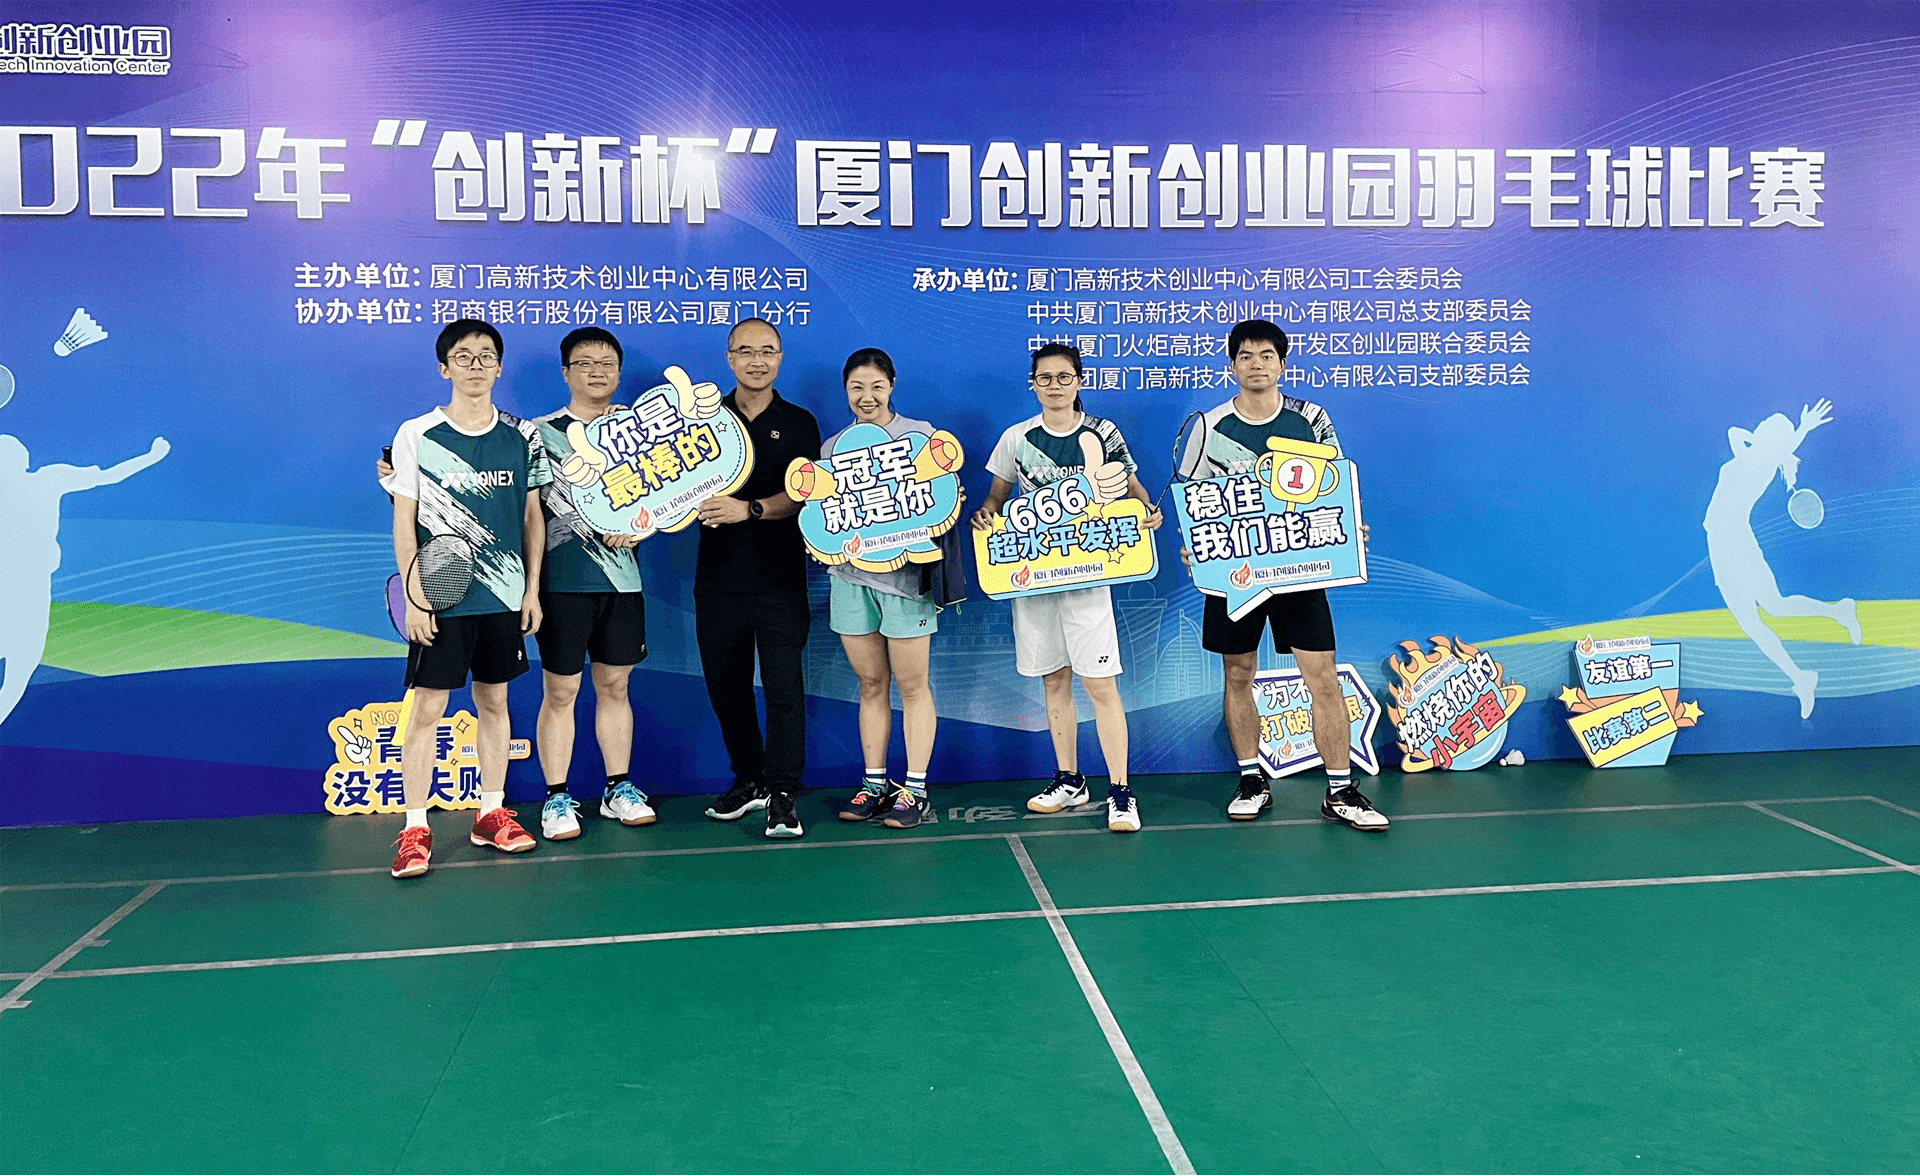 "Innovation Cup" Badminton Competition